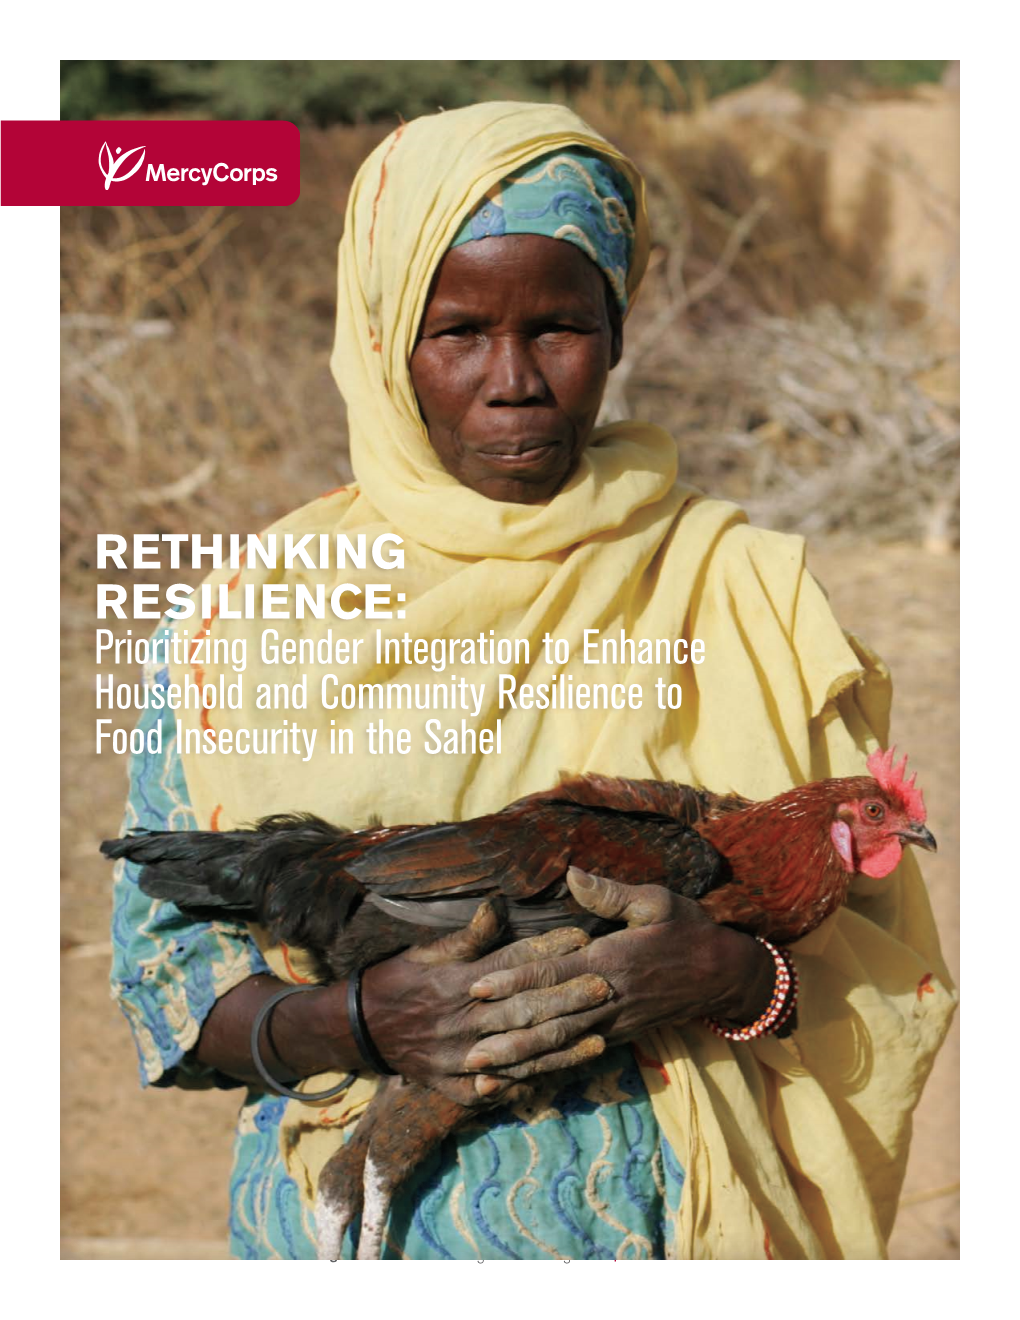 RETHINKING RESILIENCE: Prioritizing Gender Integration to Enhance Household and Community Resilience to Food Insecurity in the Sahel